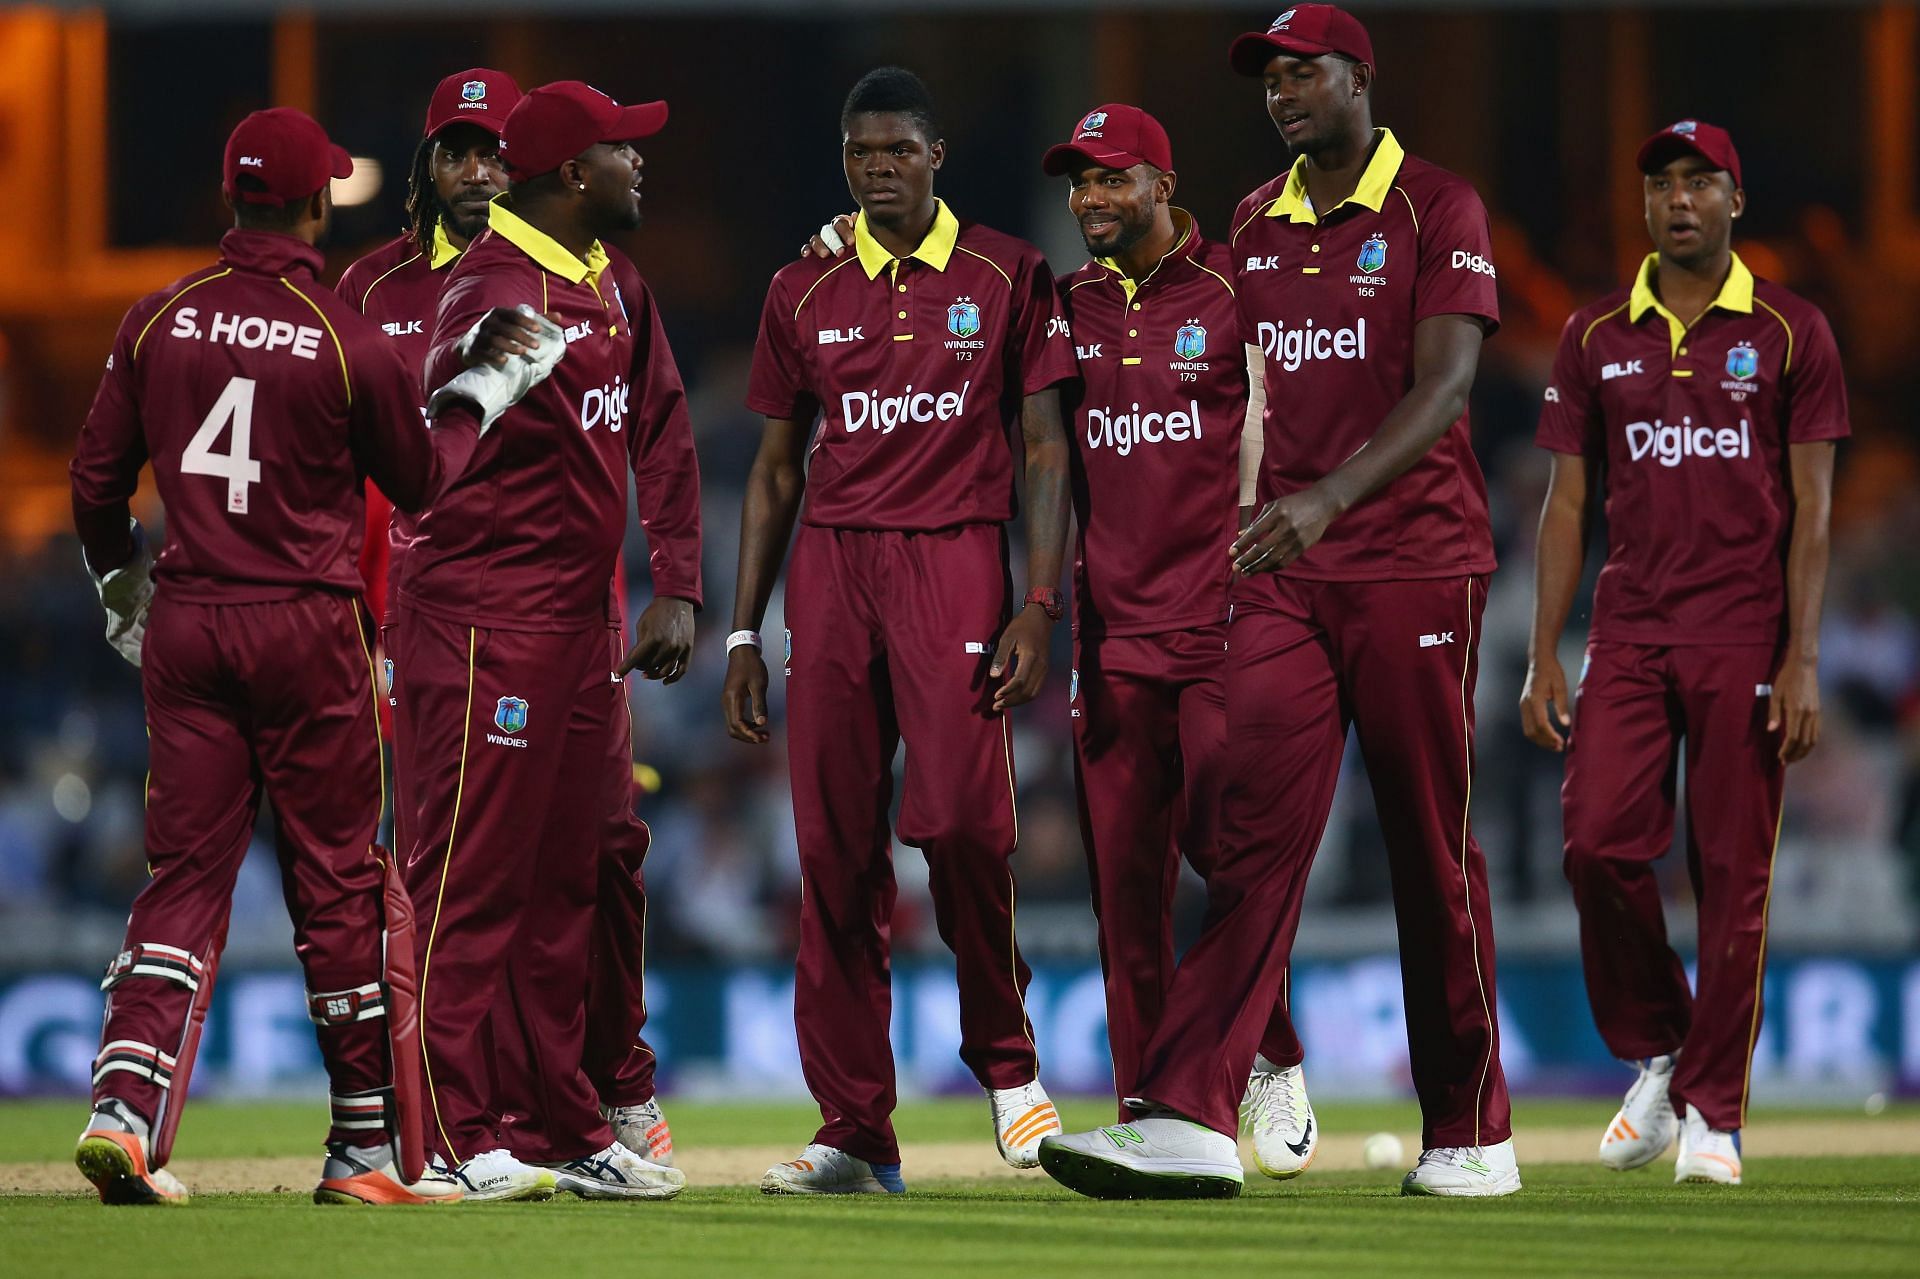 West Indies will look to beat Pakistan in the final ODI of their series.